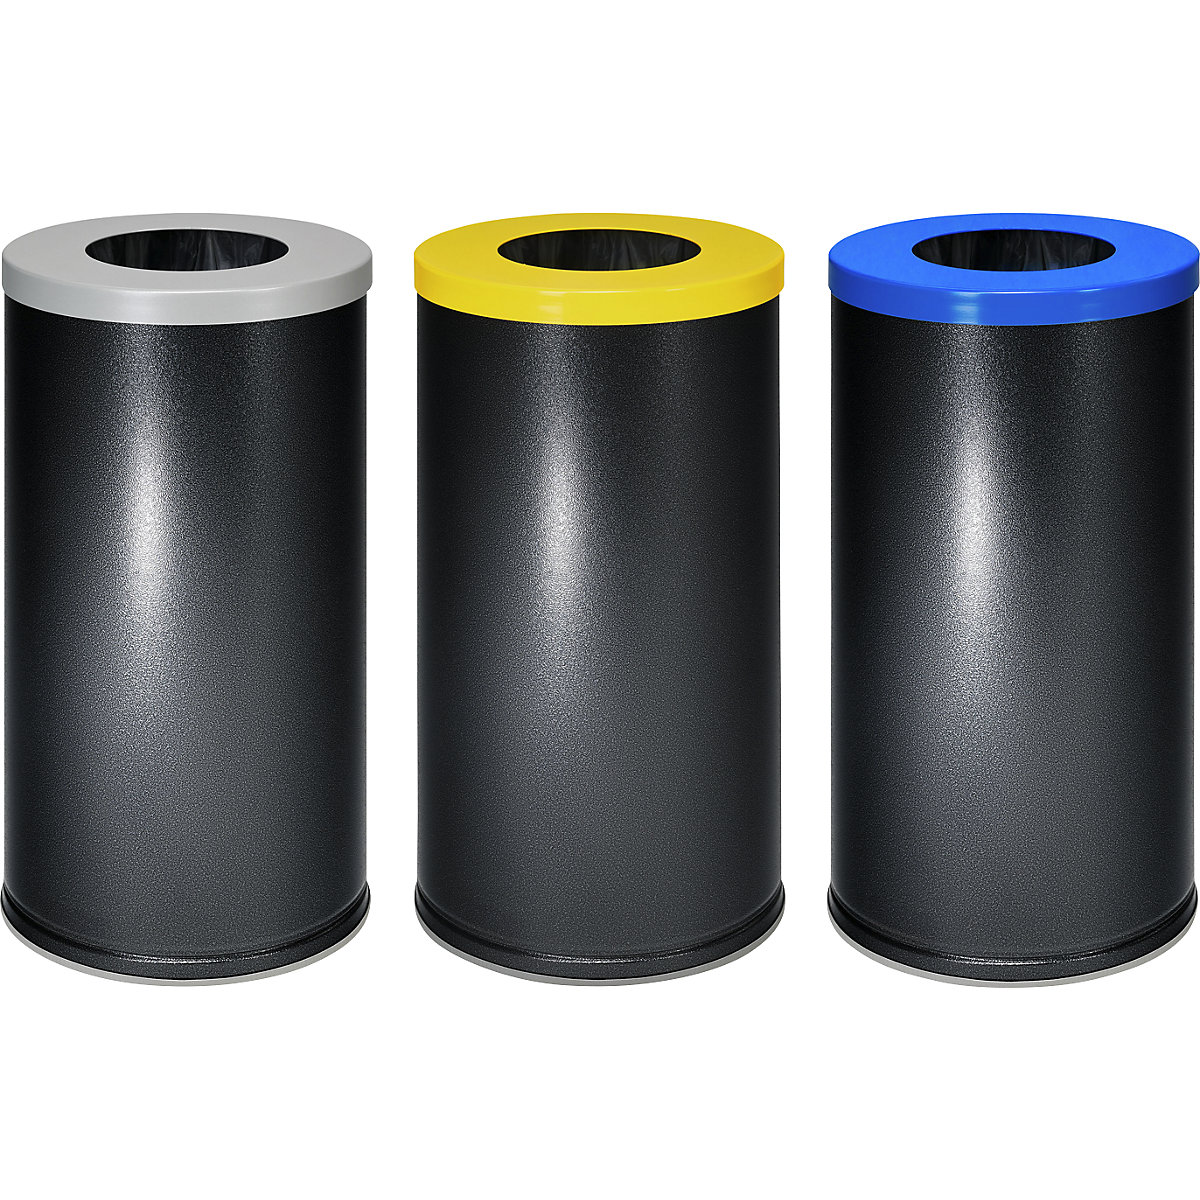 Set of 3 recyclable waste collectors - eurokraft basic